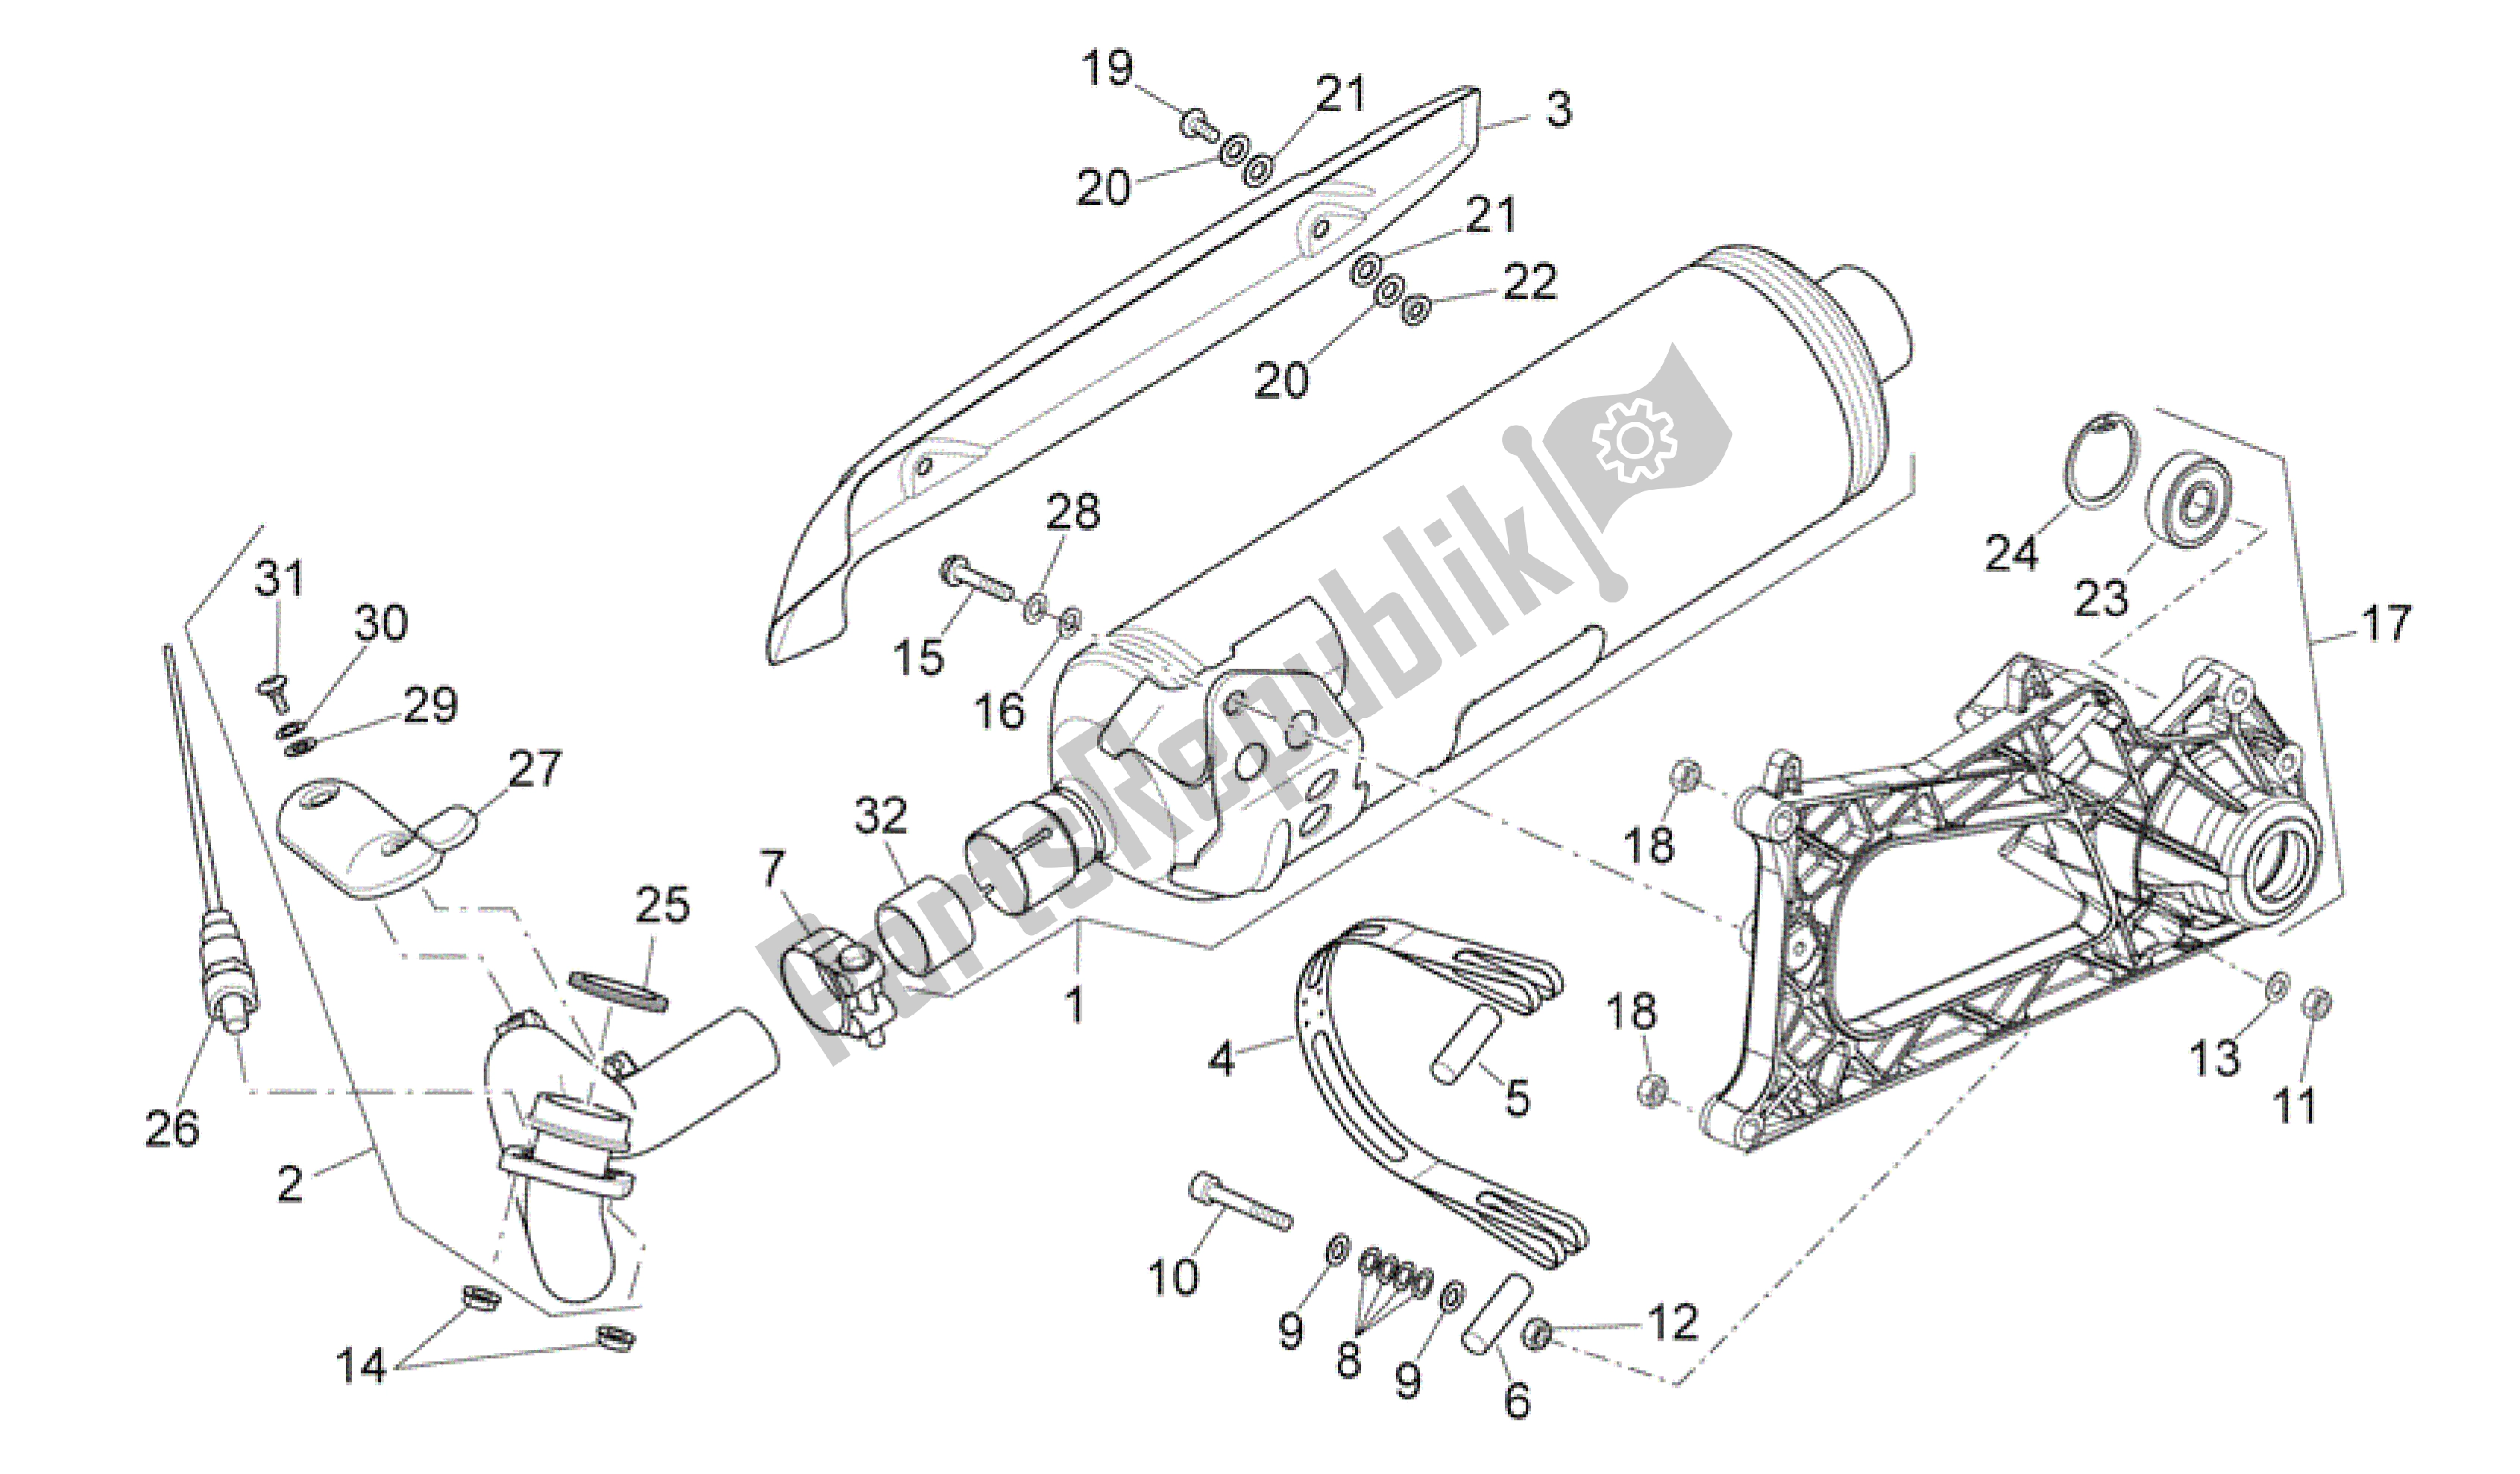 All parts for the Exhaust Unit of the Aprilia Scarabeo 500 2006 - 2008